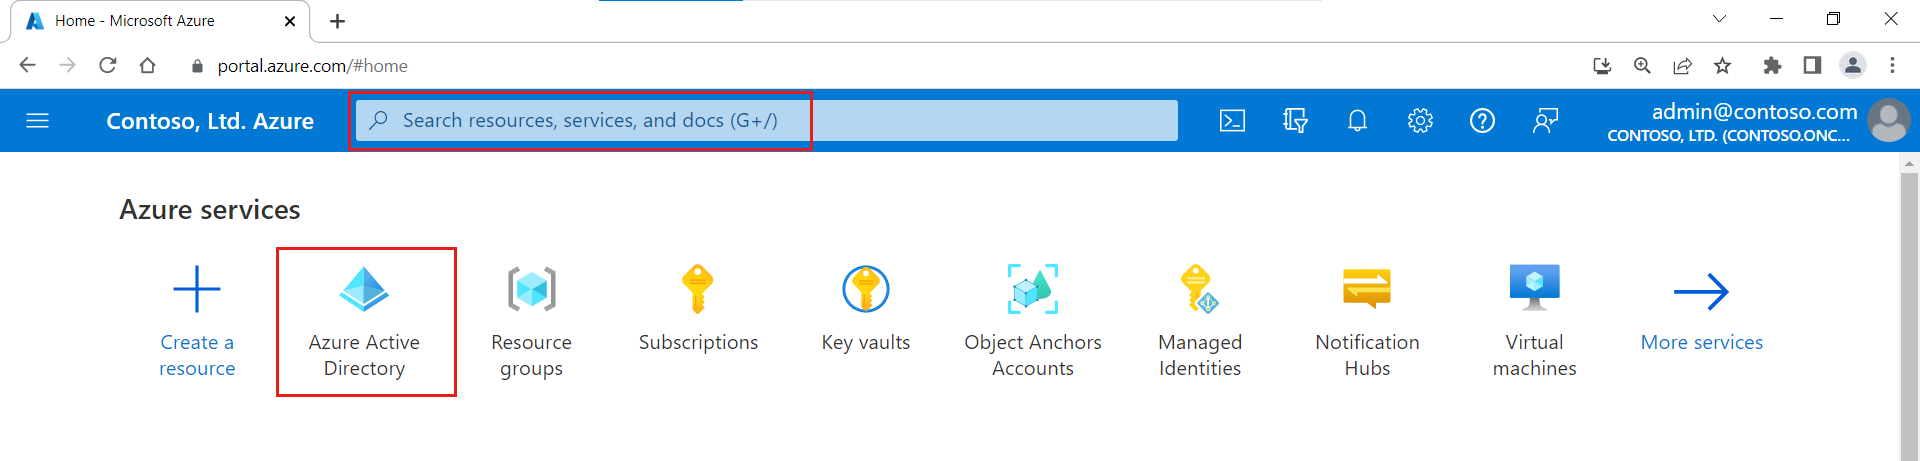 Screenshot showing where to select the Azure Active Directory service.